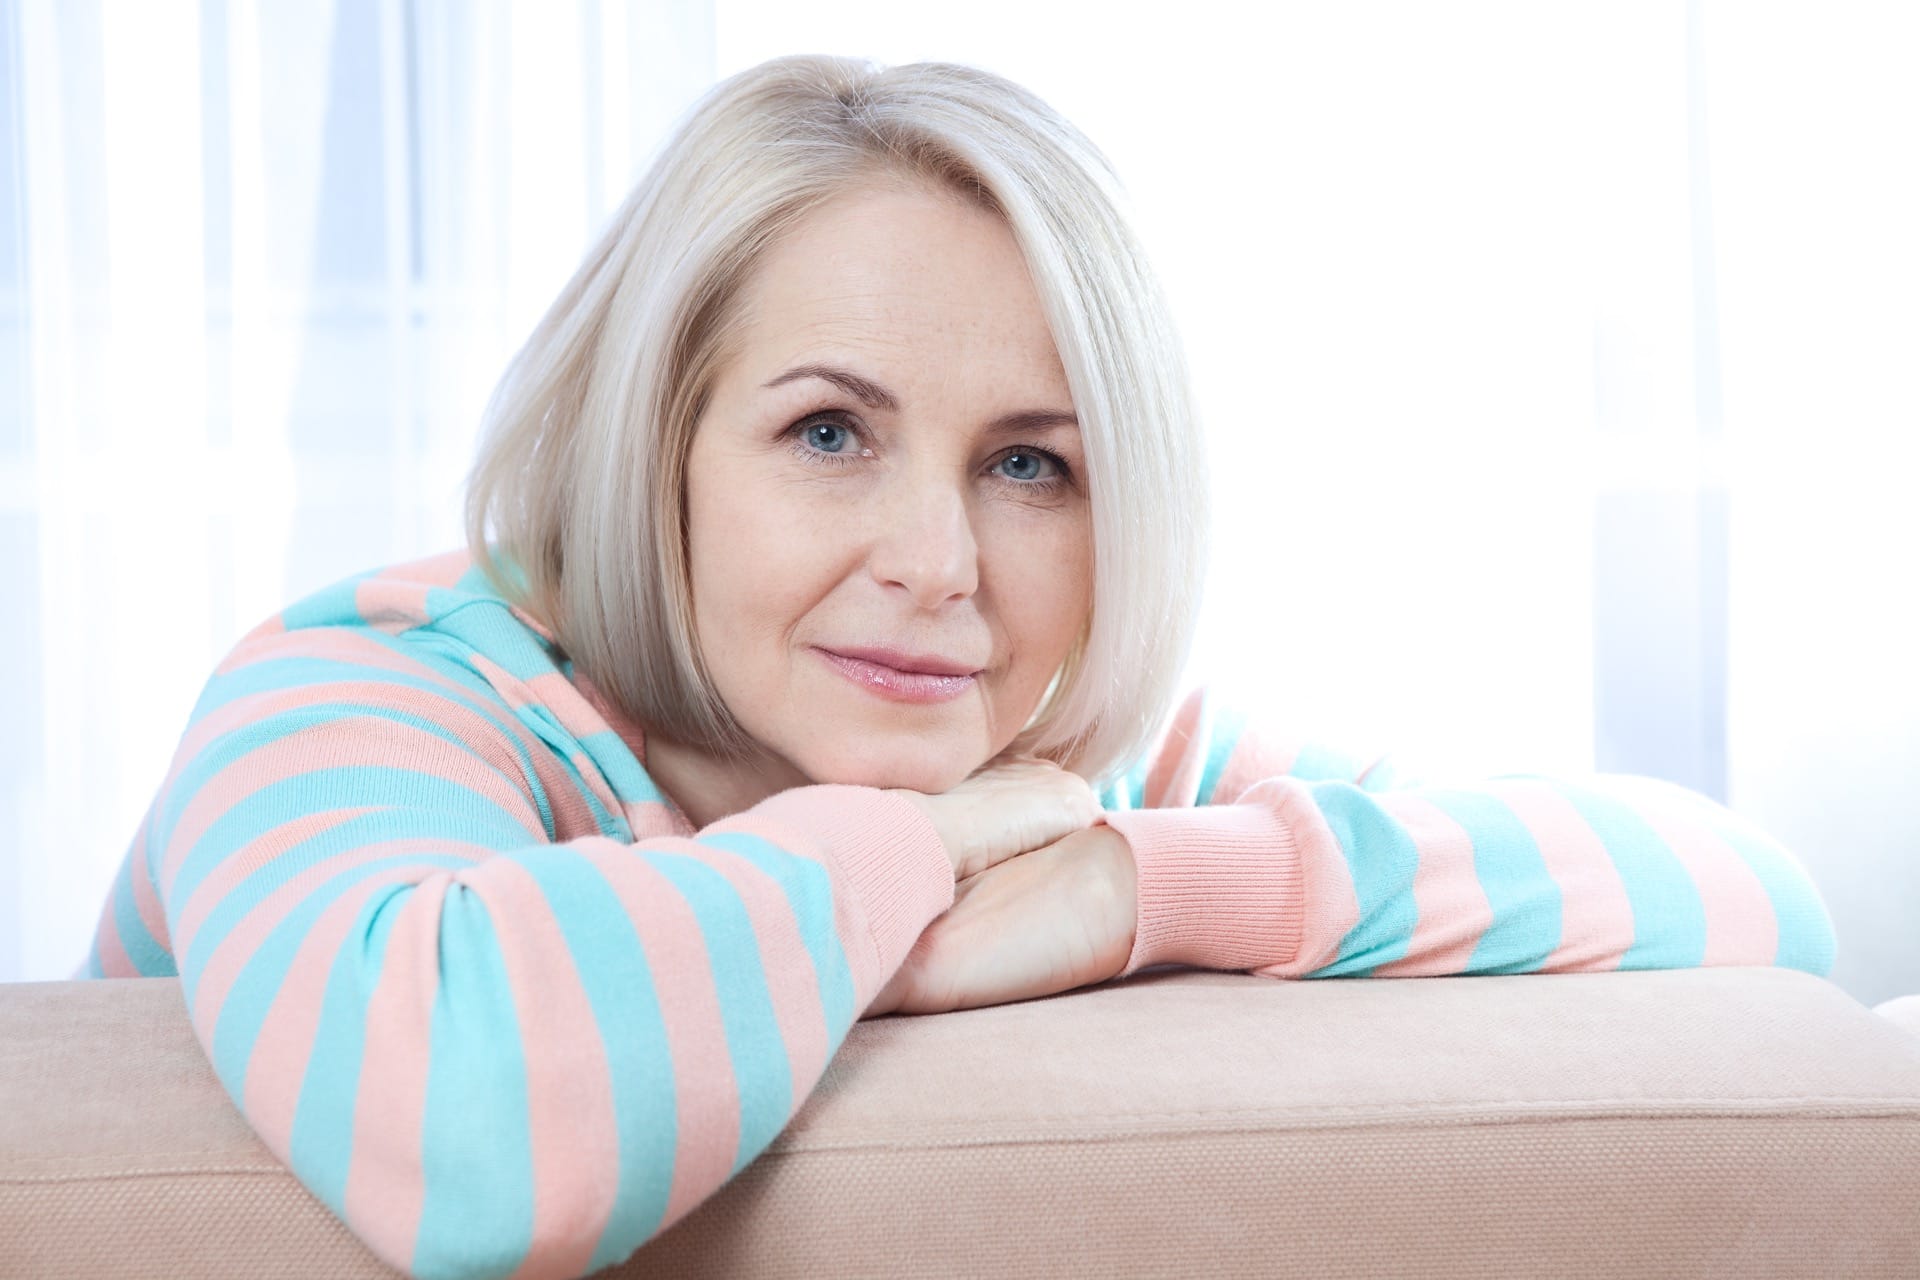 https://www.yourhealth.net.au/wp-content/uploads/2018/04/Middle-aged-woman-relaxing-at-home.jpg